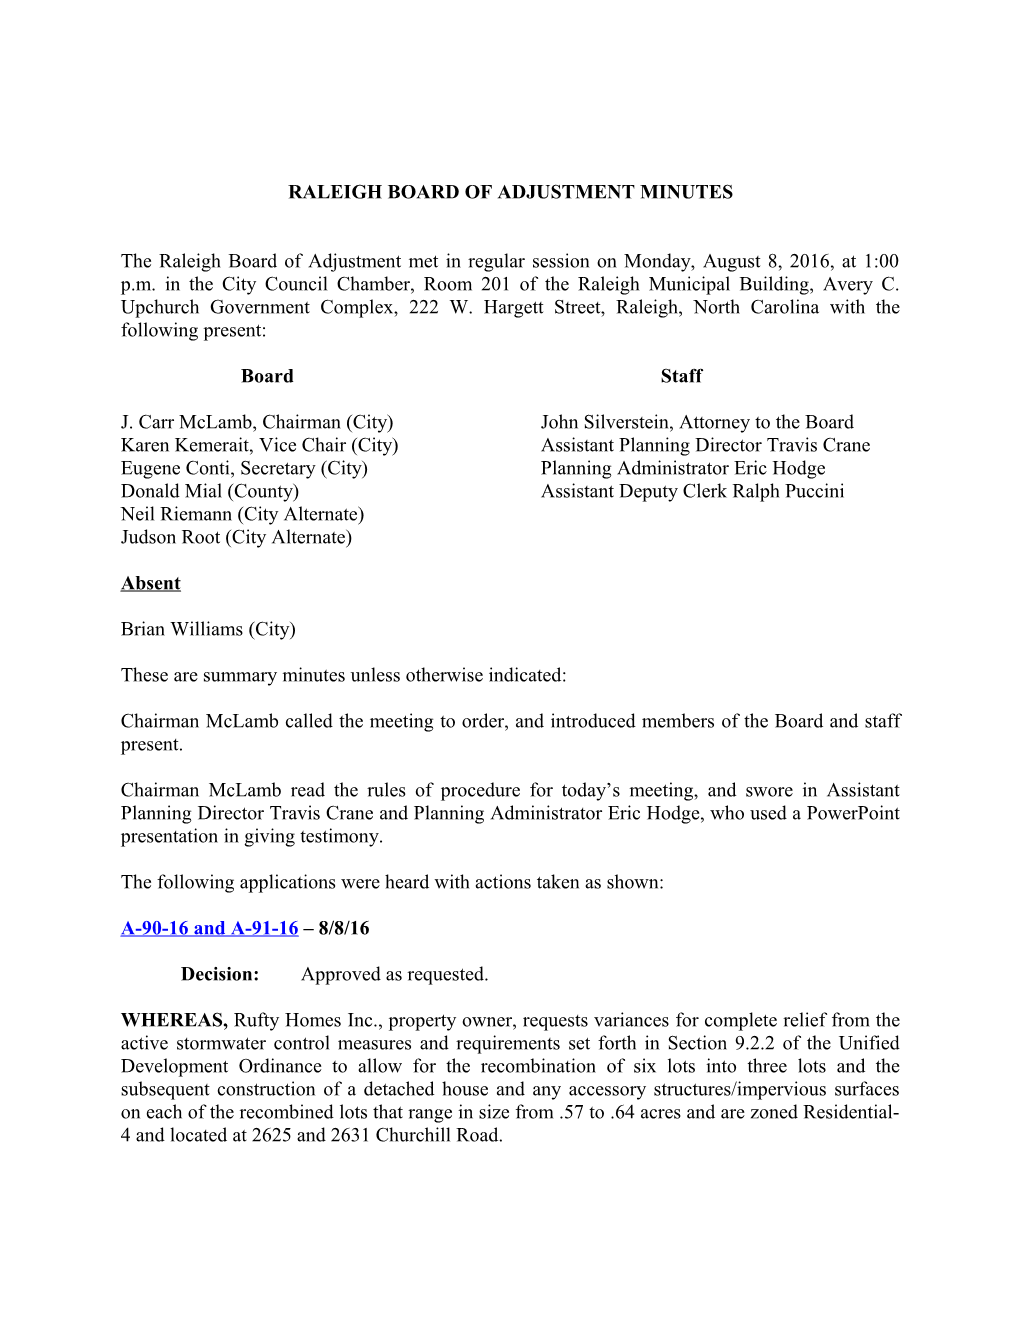 Raleigh Board of Adjustment Minutes - 08/08/2016